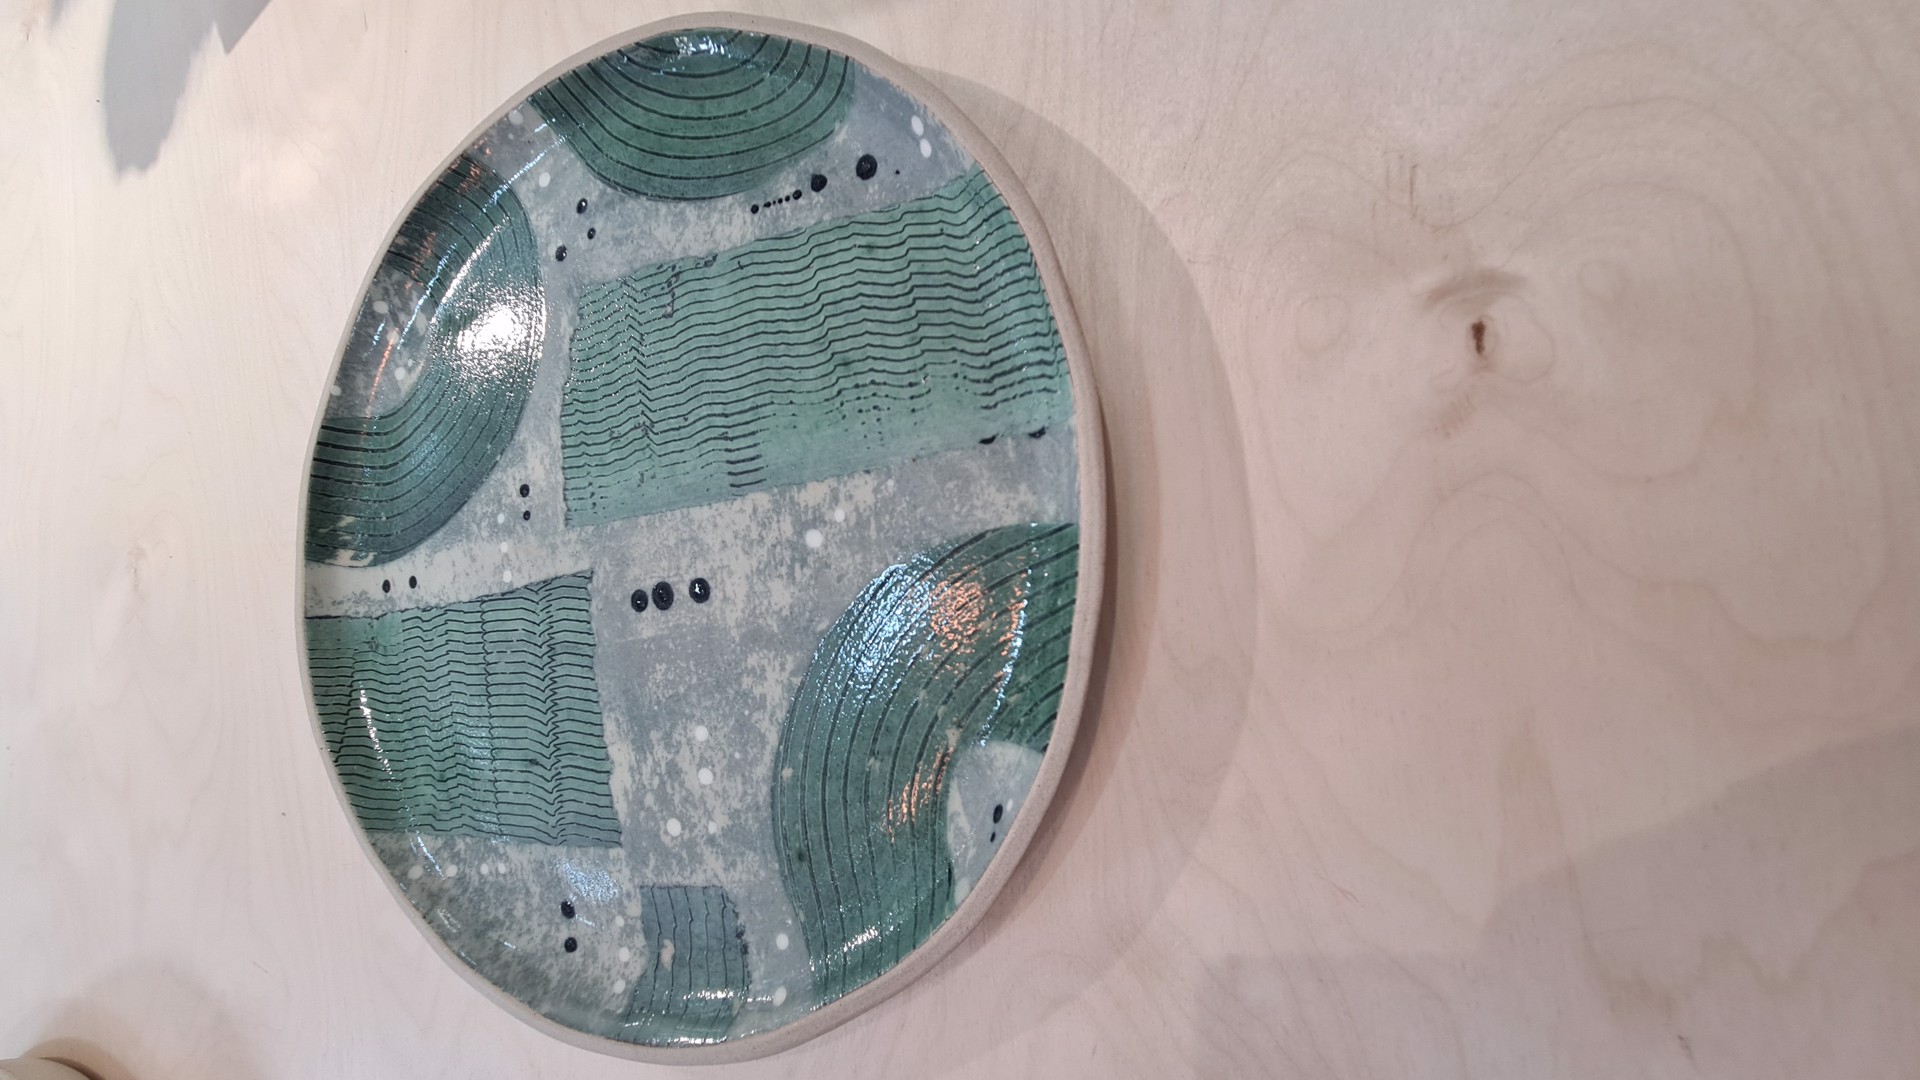 Abstract - Large Plate by Cat Santos